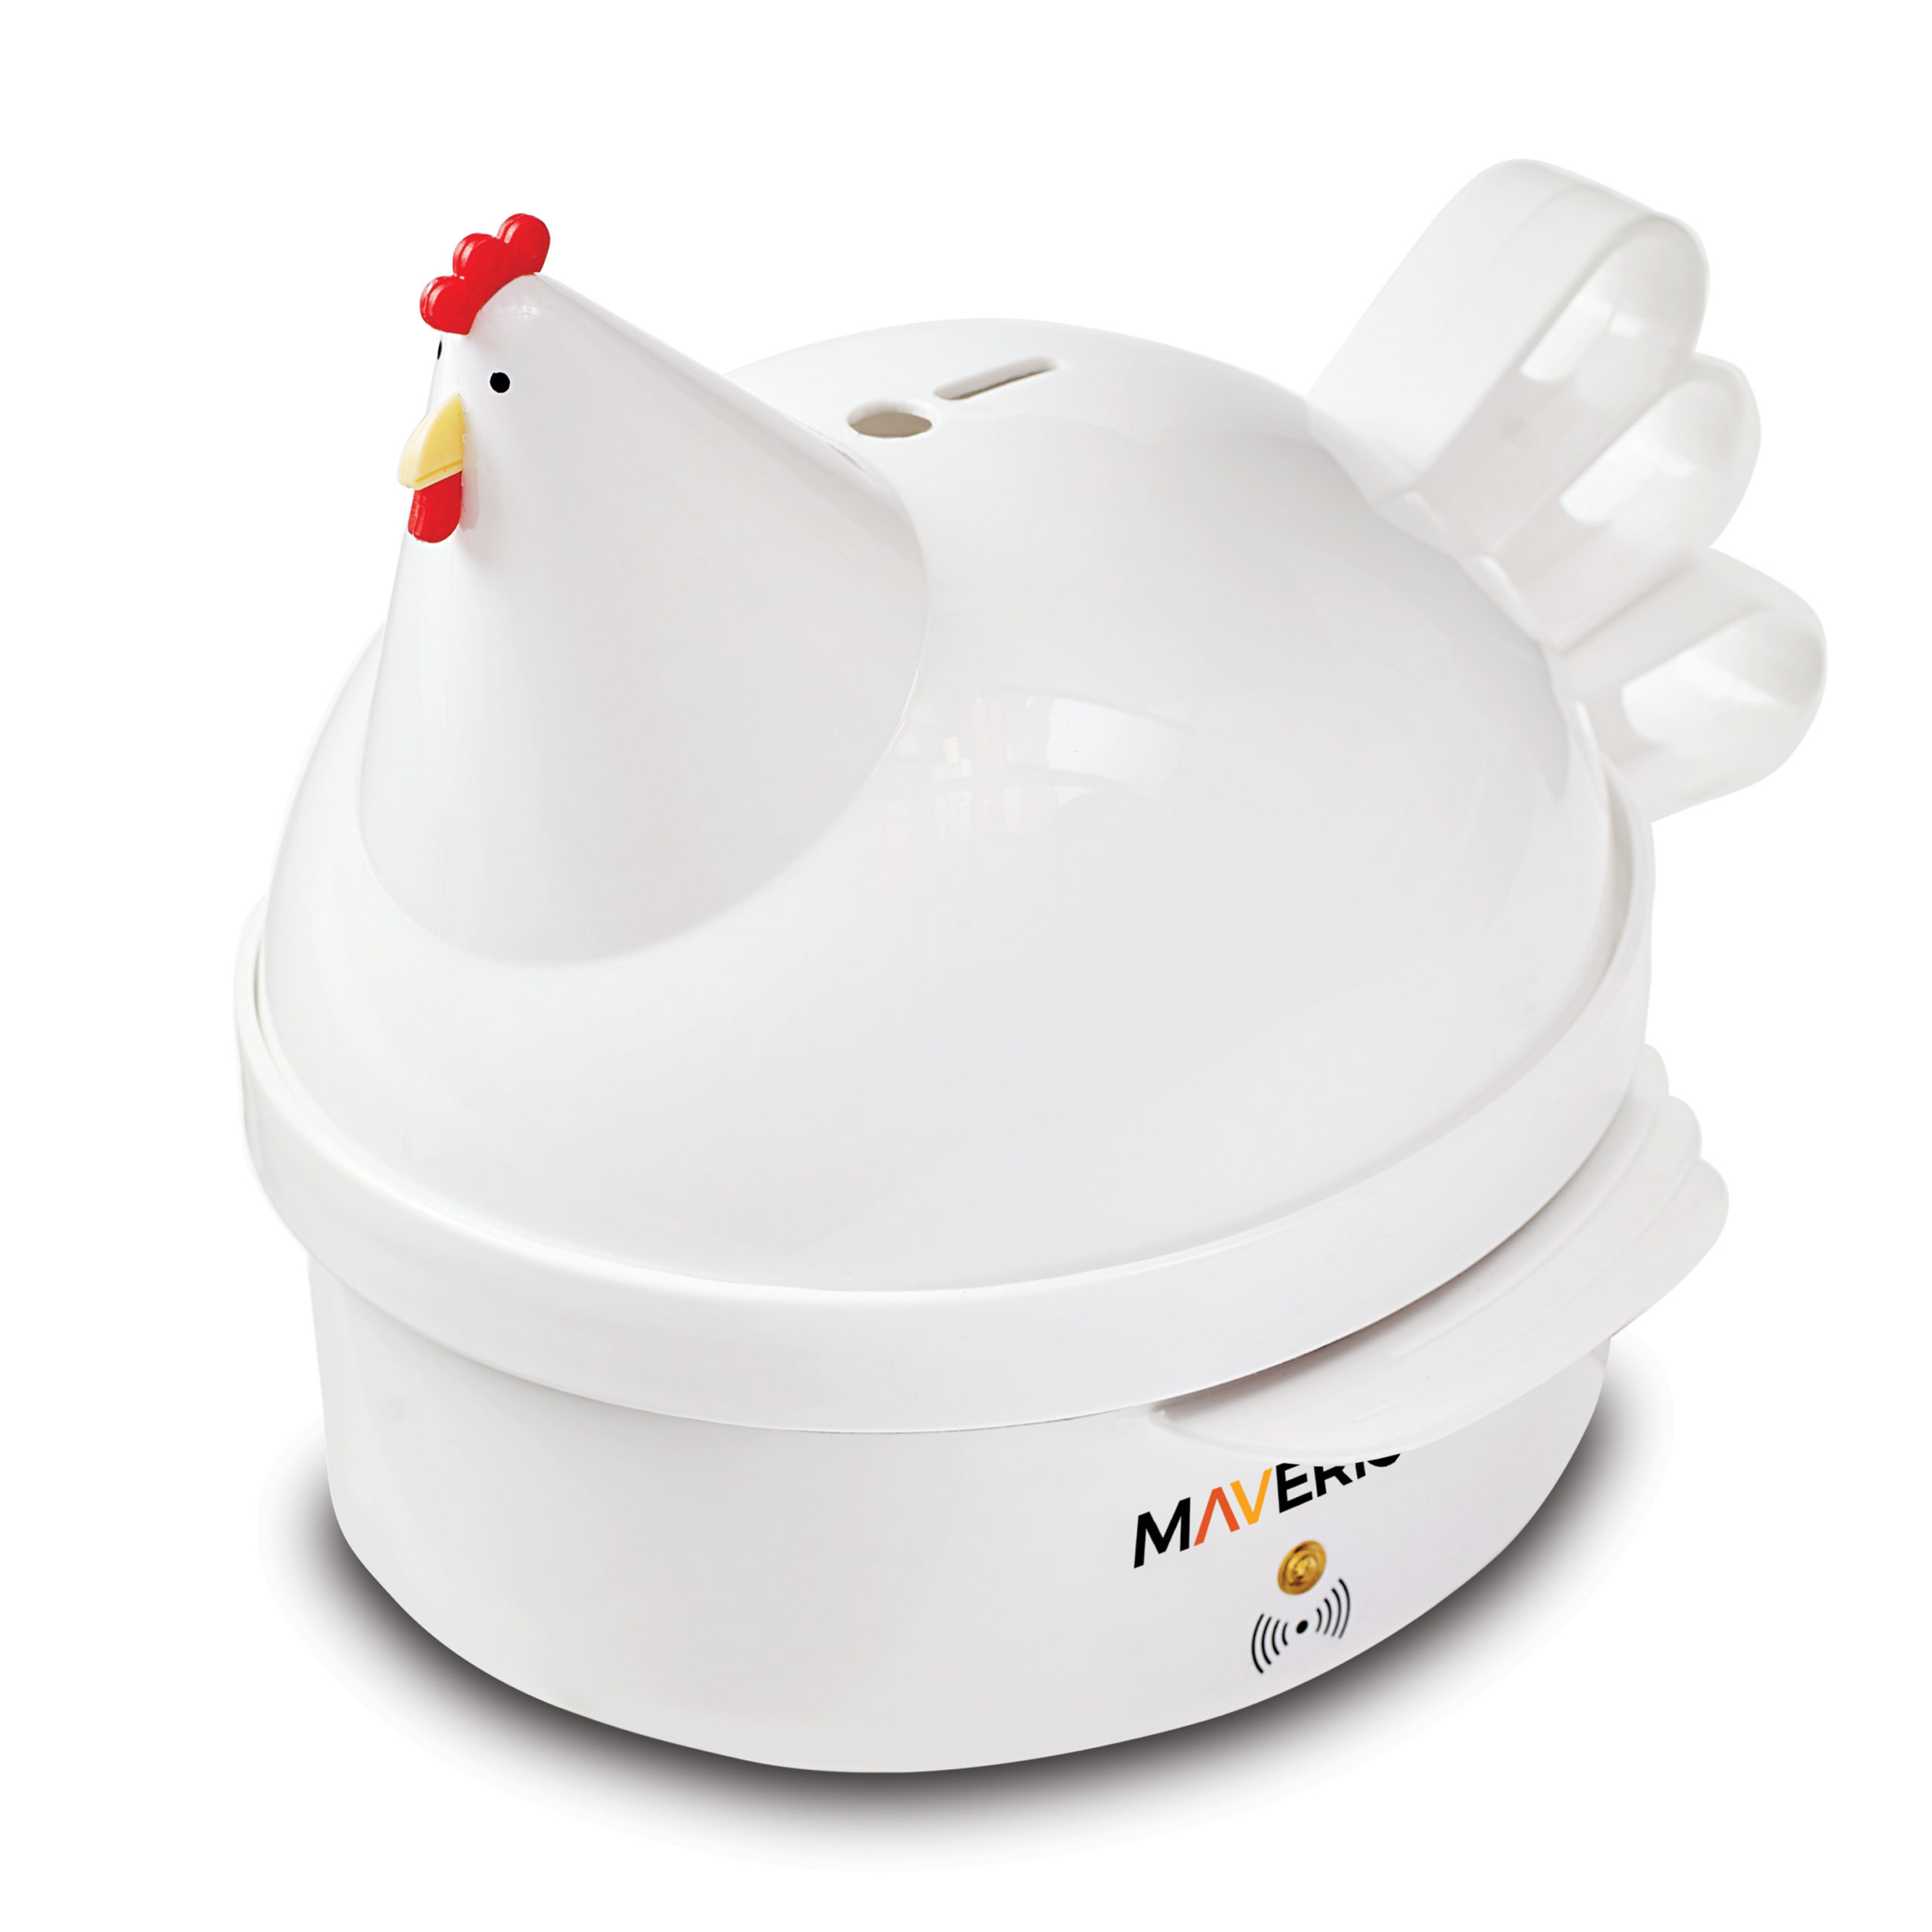 5 Best Egg Cookers of 2022 - Top-Reviewed Egg Boilers and Makers to Buy